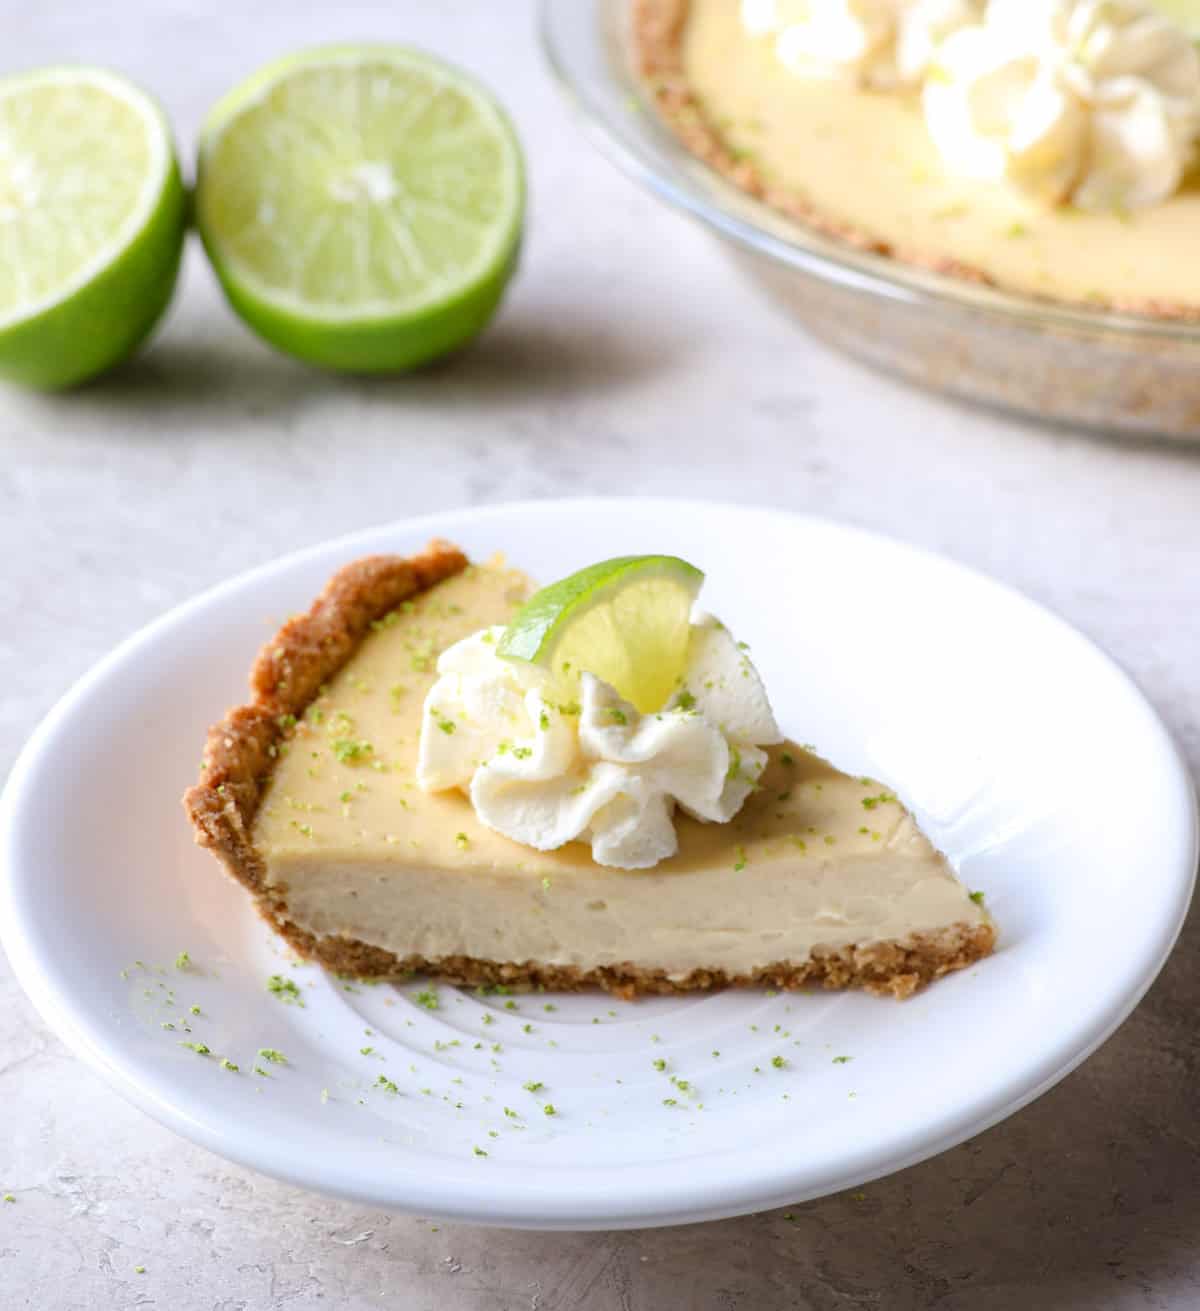 a slice of key lime pie with whipped topping and a lime slice